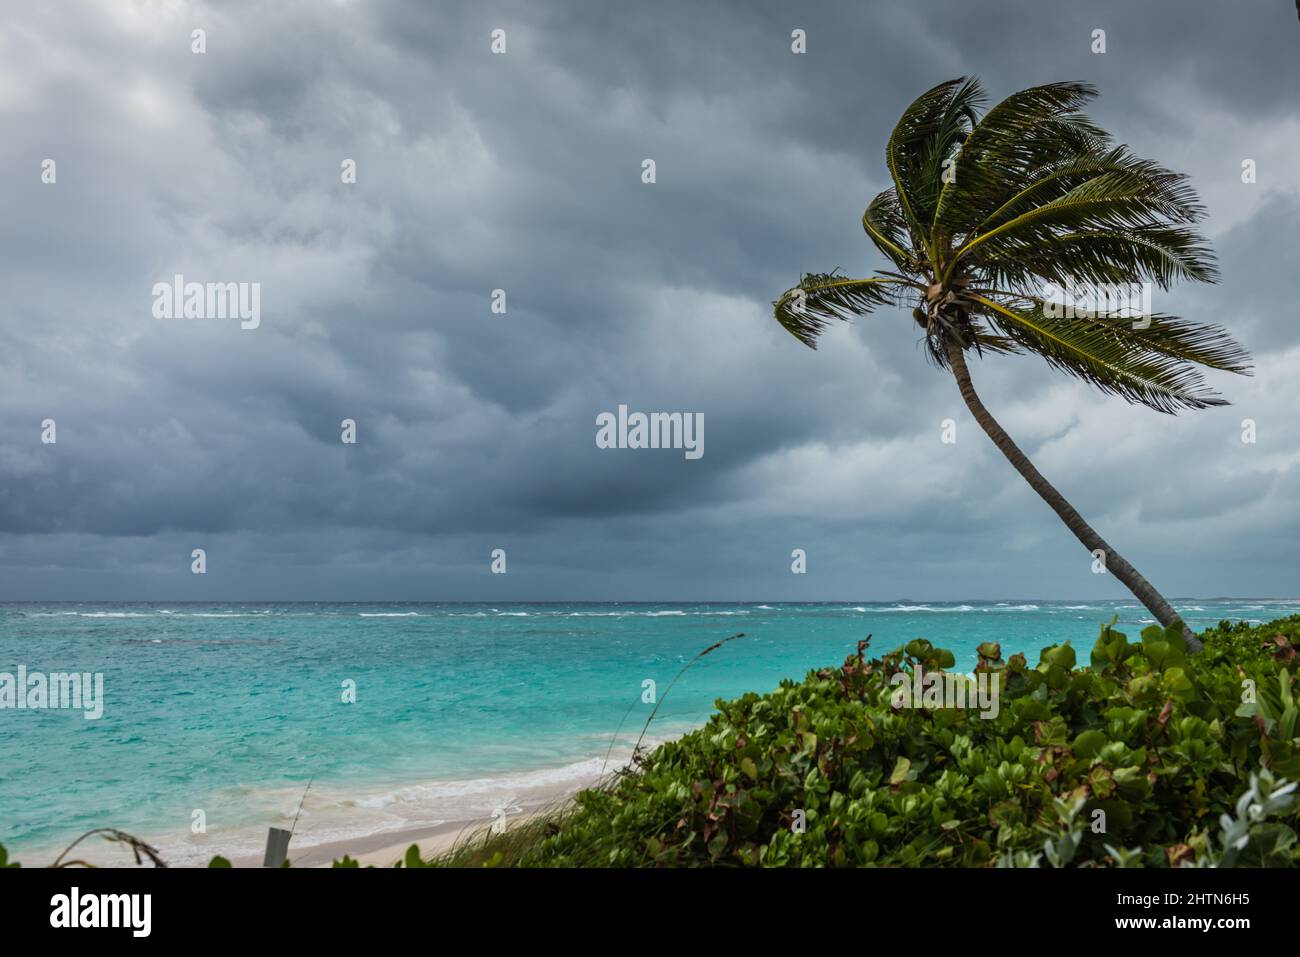 Windy day on beach at Elbow Cay at Hope Town Bahamas in the Abaco Islands. Stock Photo